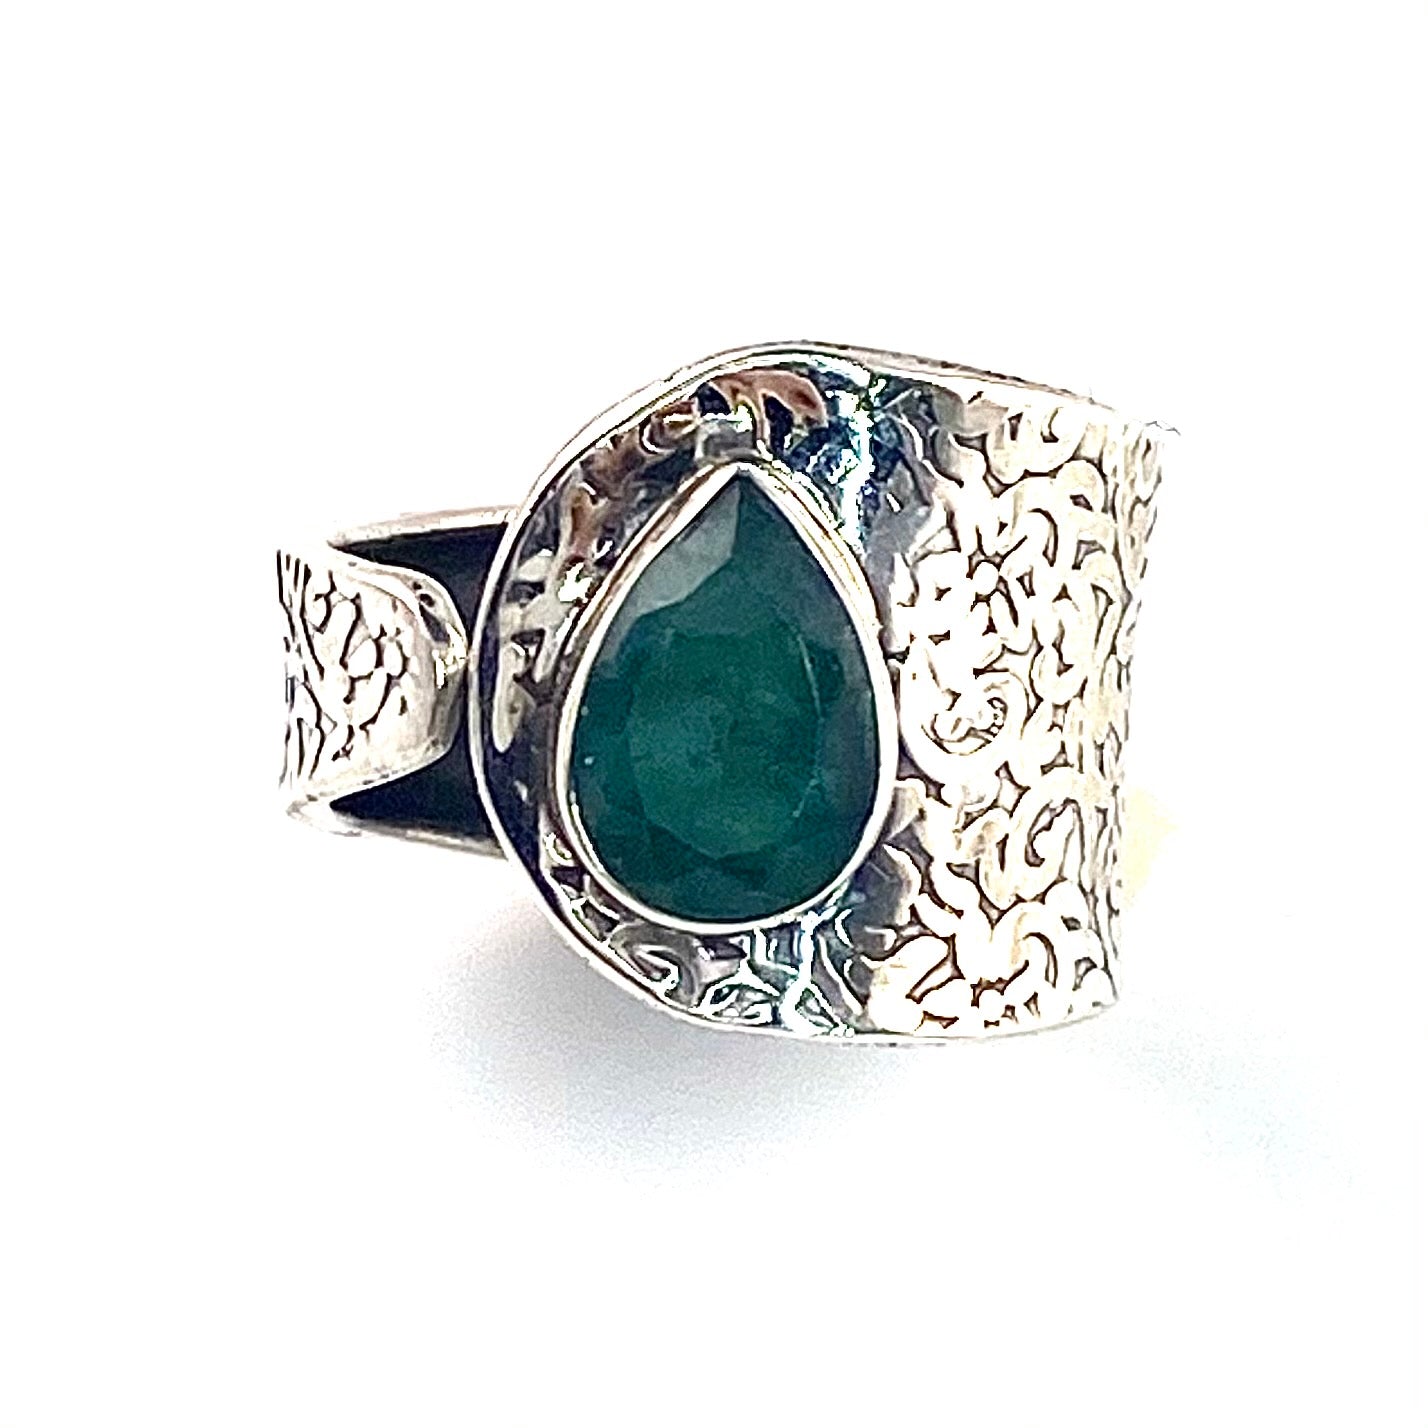 Emerald Sterling Silver Adjustable Textured Ring - Keja Designs Jewelry